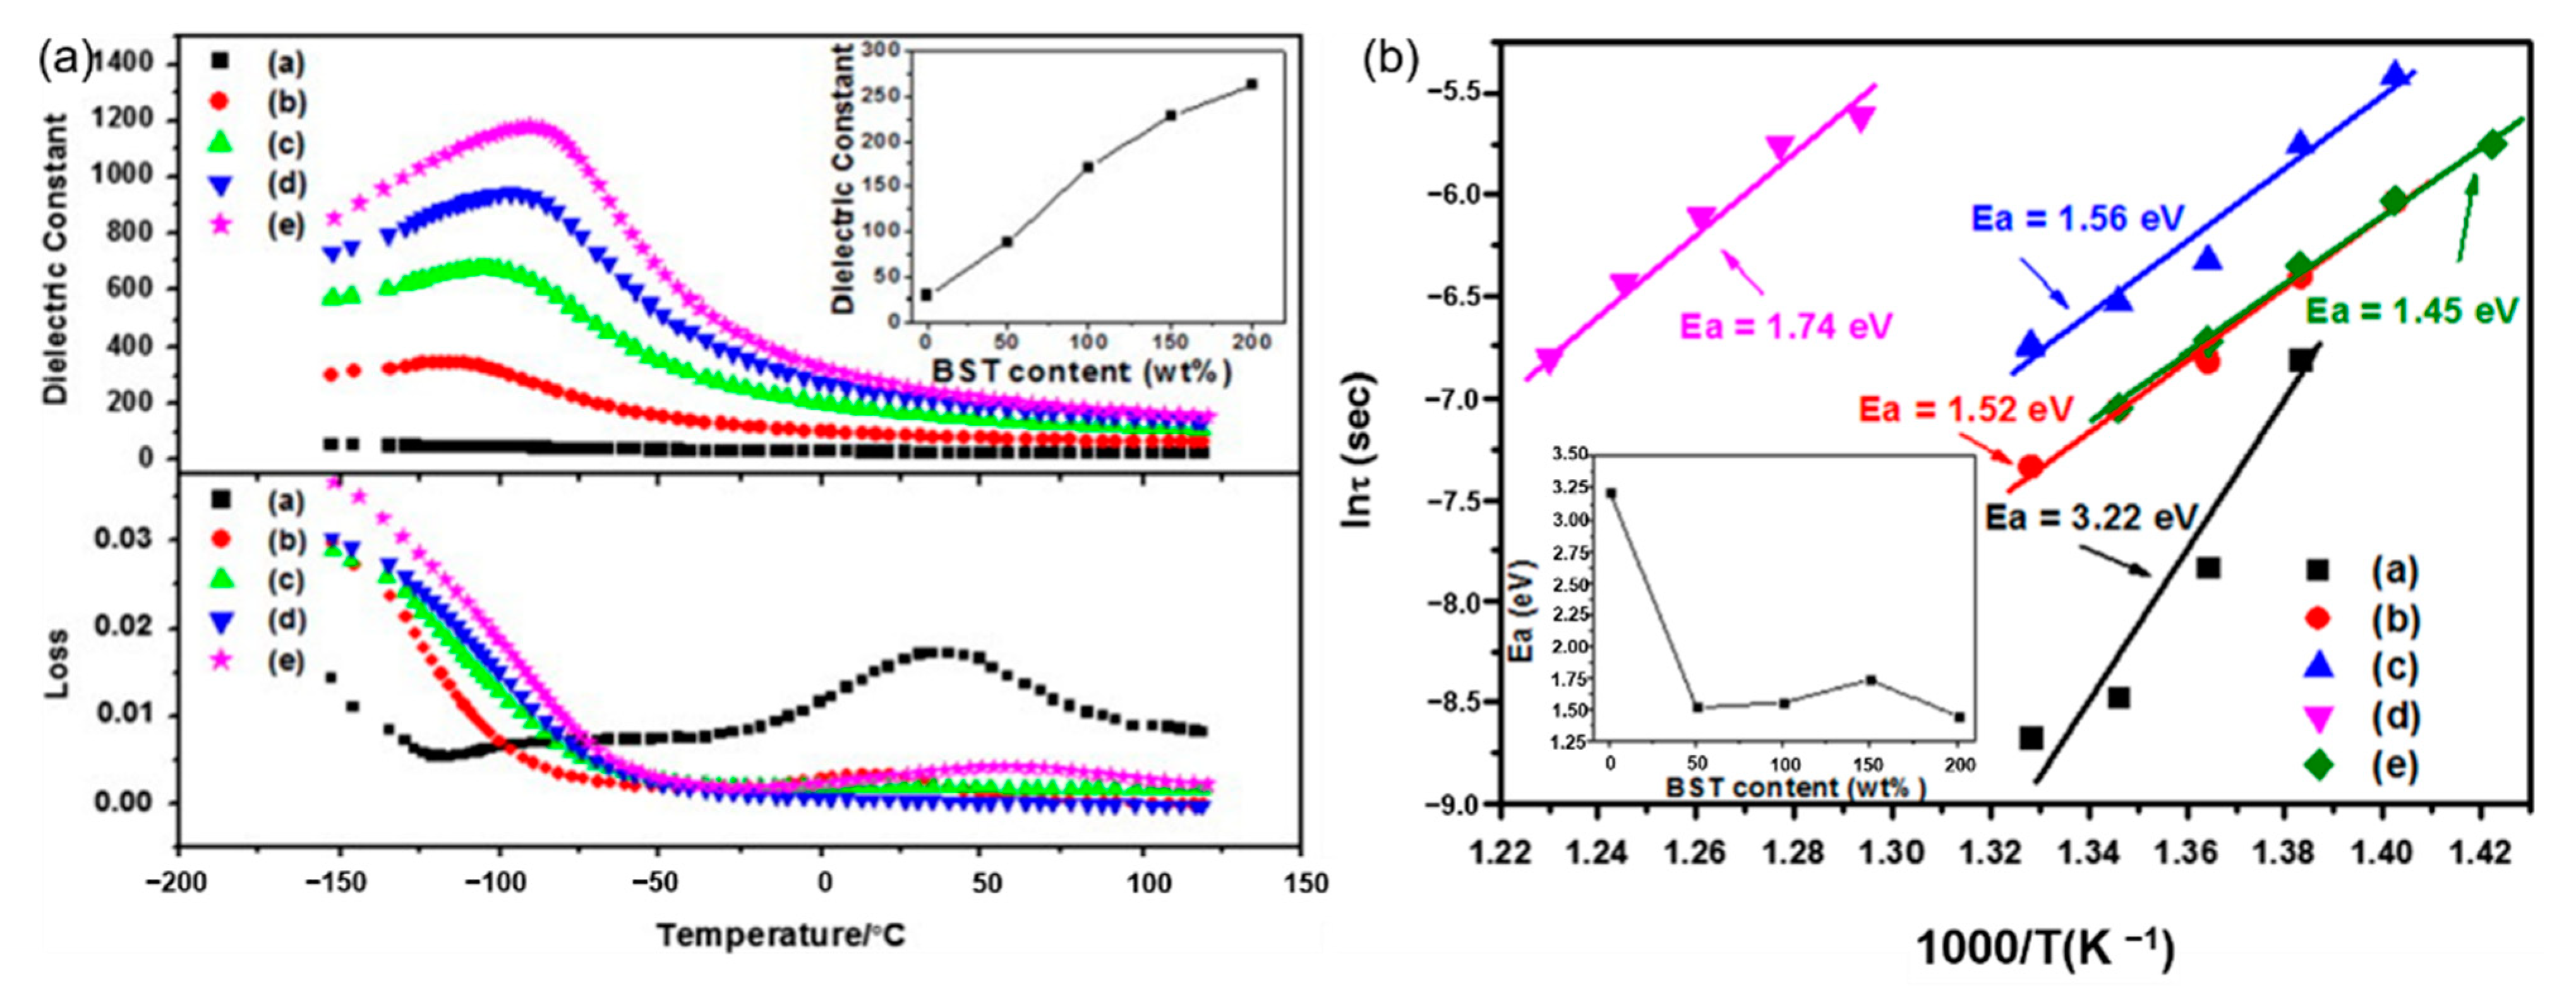 Molecules Free Full Text Energy Storage And Electrocaloric Cooling Performance Of Advanced Dielectrics Html